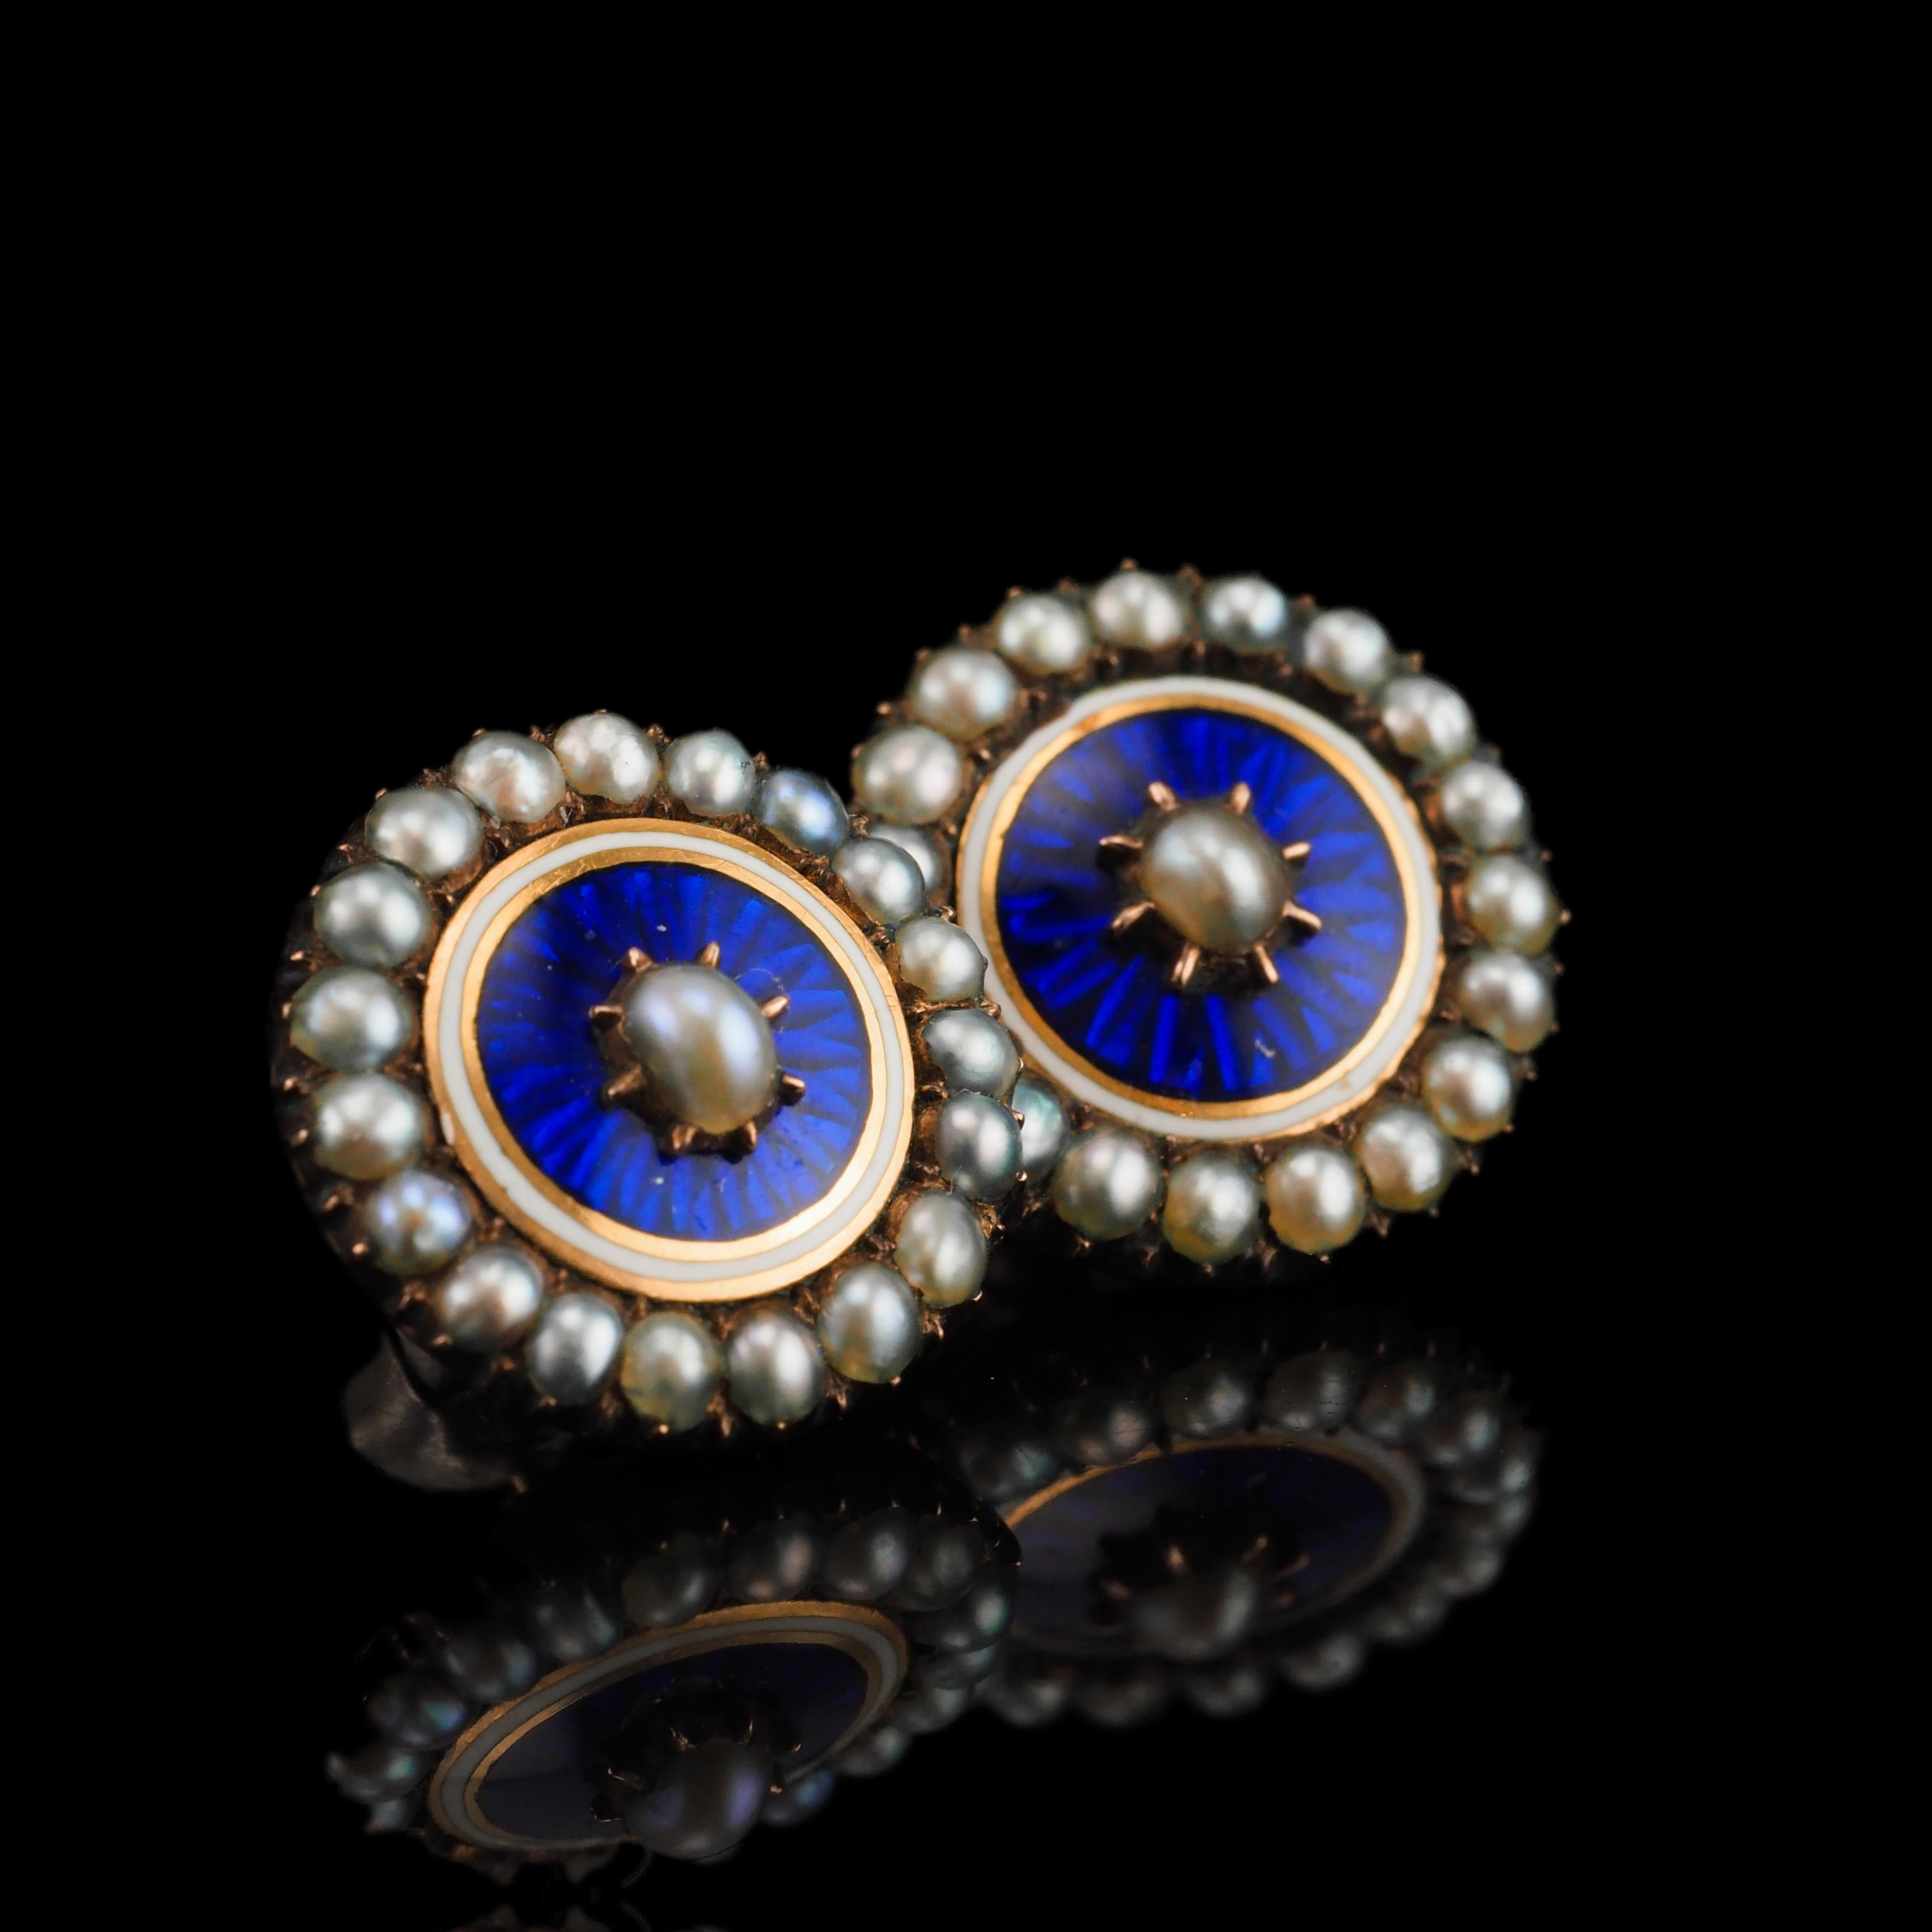 Antique Georgian Gold Earrings with Blue Enamel Guilloche Pearl Cluster c.1800 For Sale 10